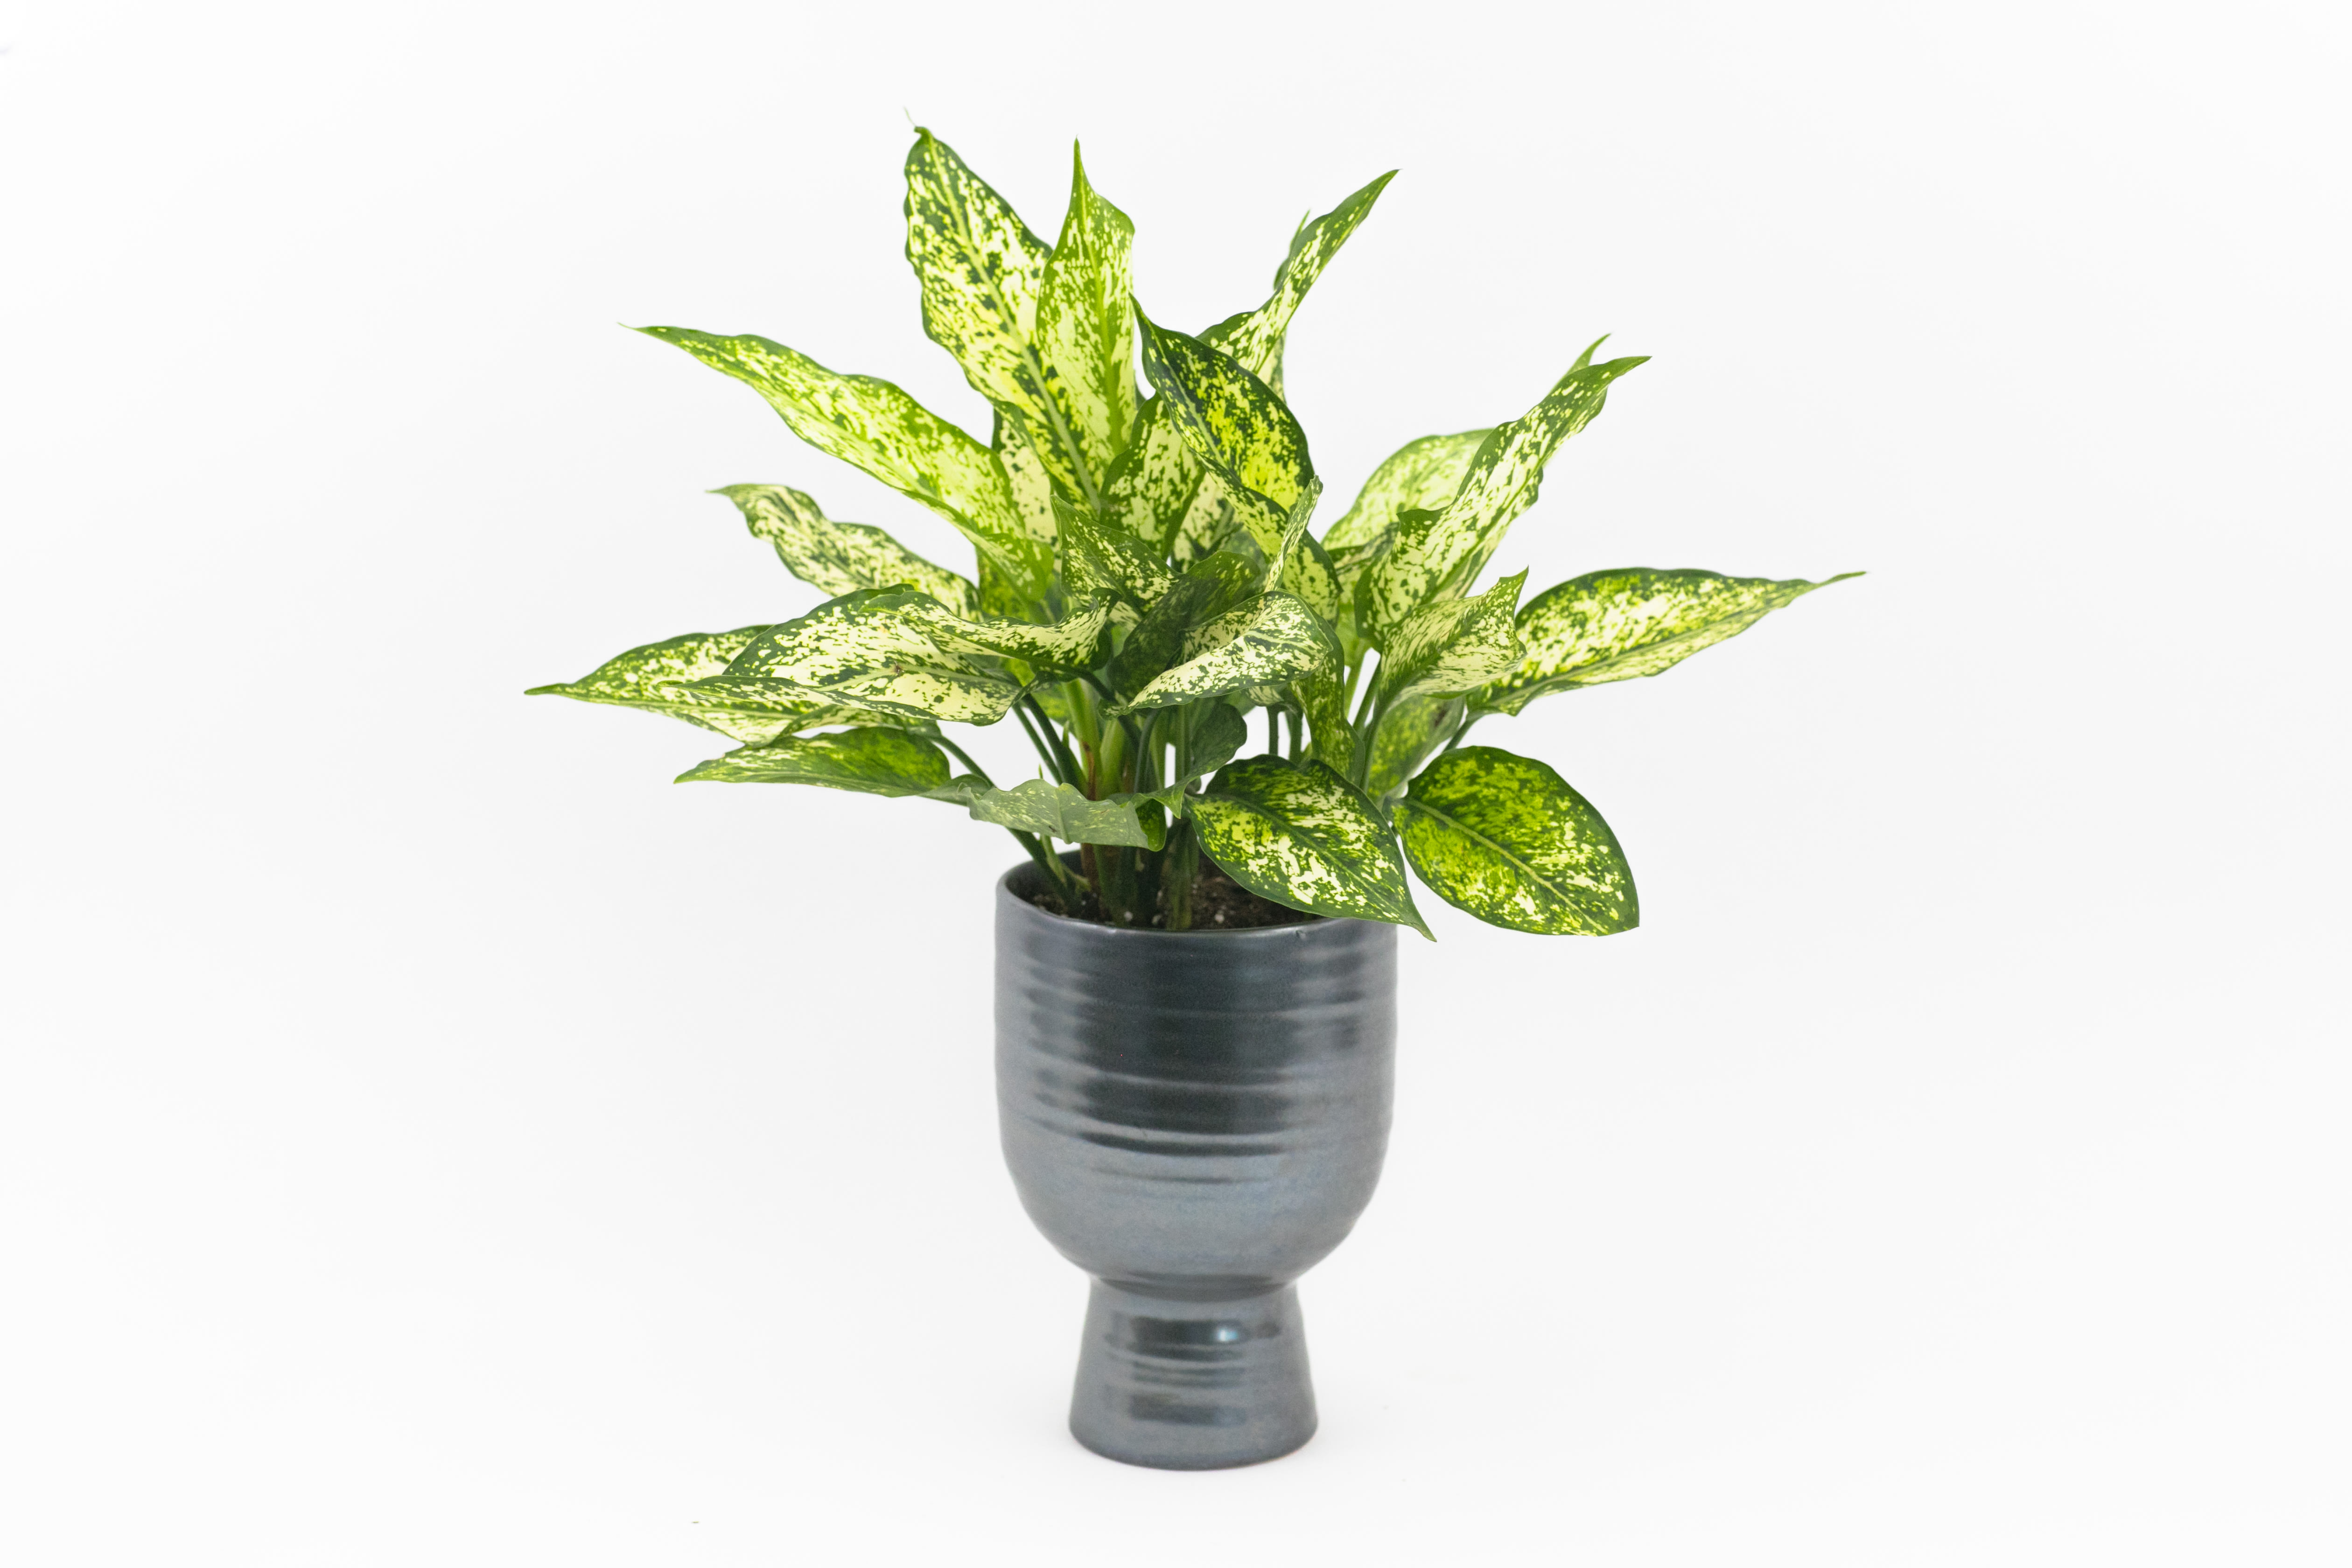 Aglaonema First Diamond Plant Live Plant In San Francisco Ca Sol Ambiance,Cooking Prime Rib Roast On Rotisserie Barbecue